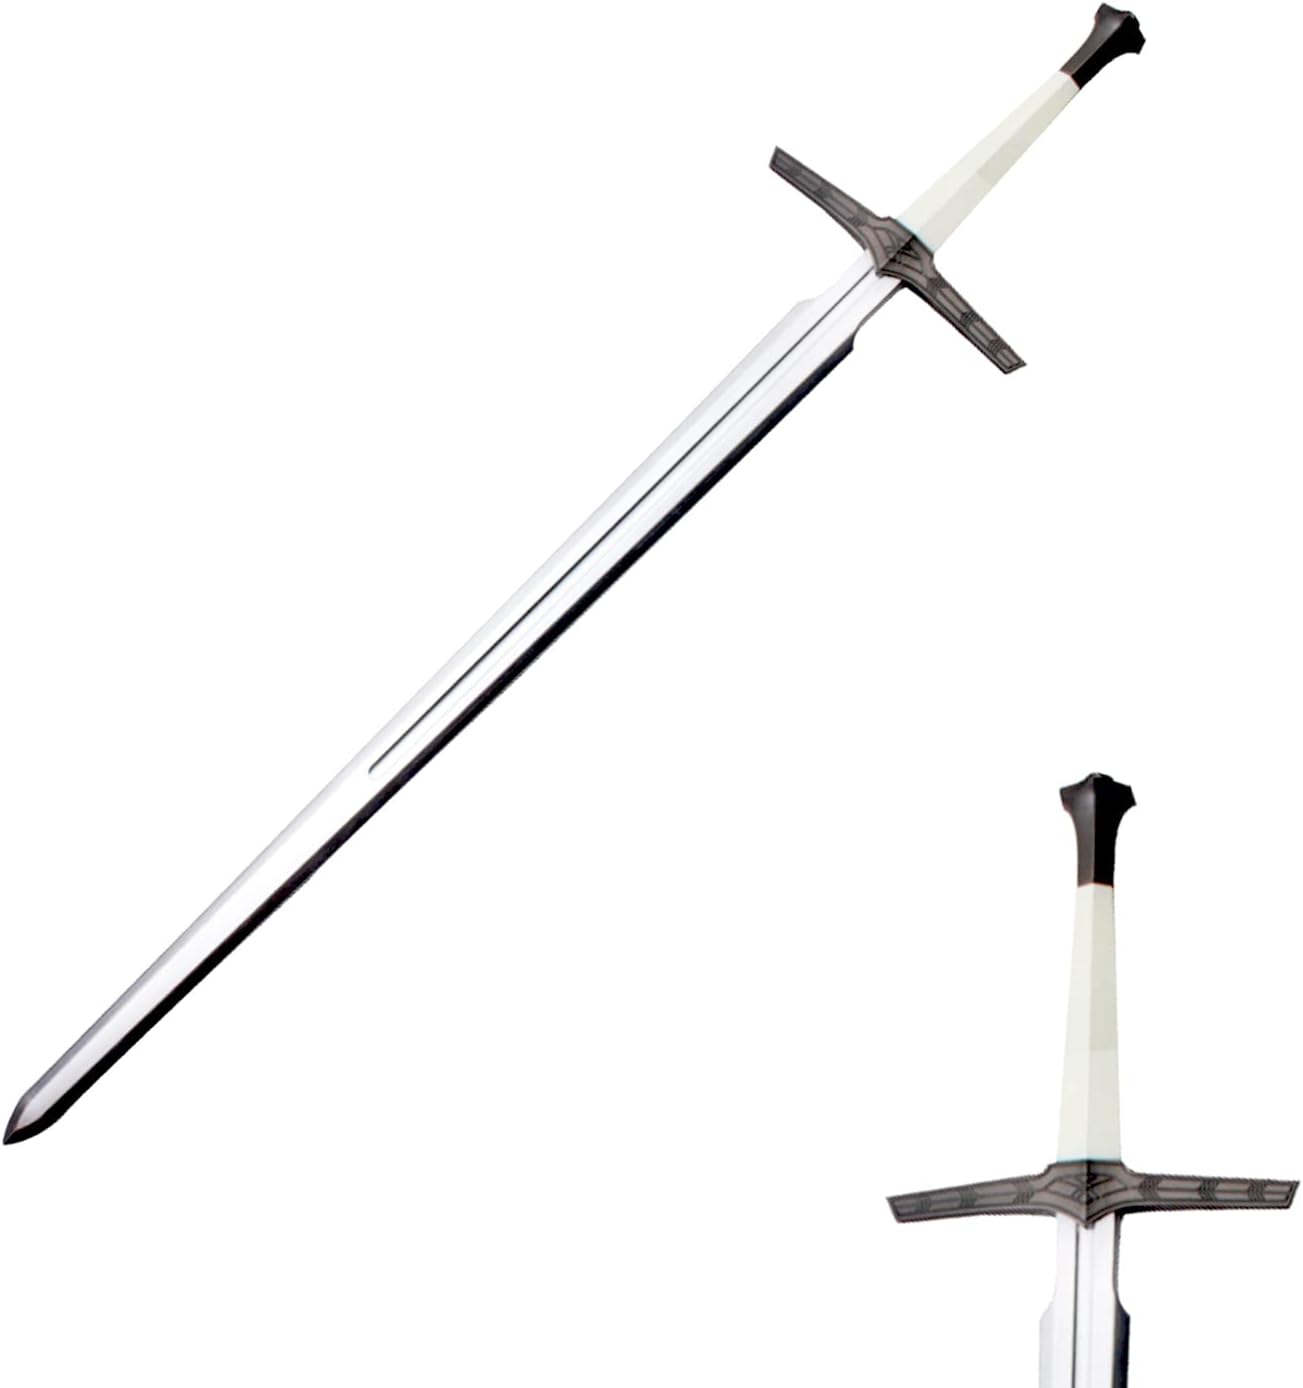 The Witcher Silver Hunting Long Foam Sword for Cosplay LARP